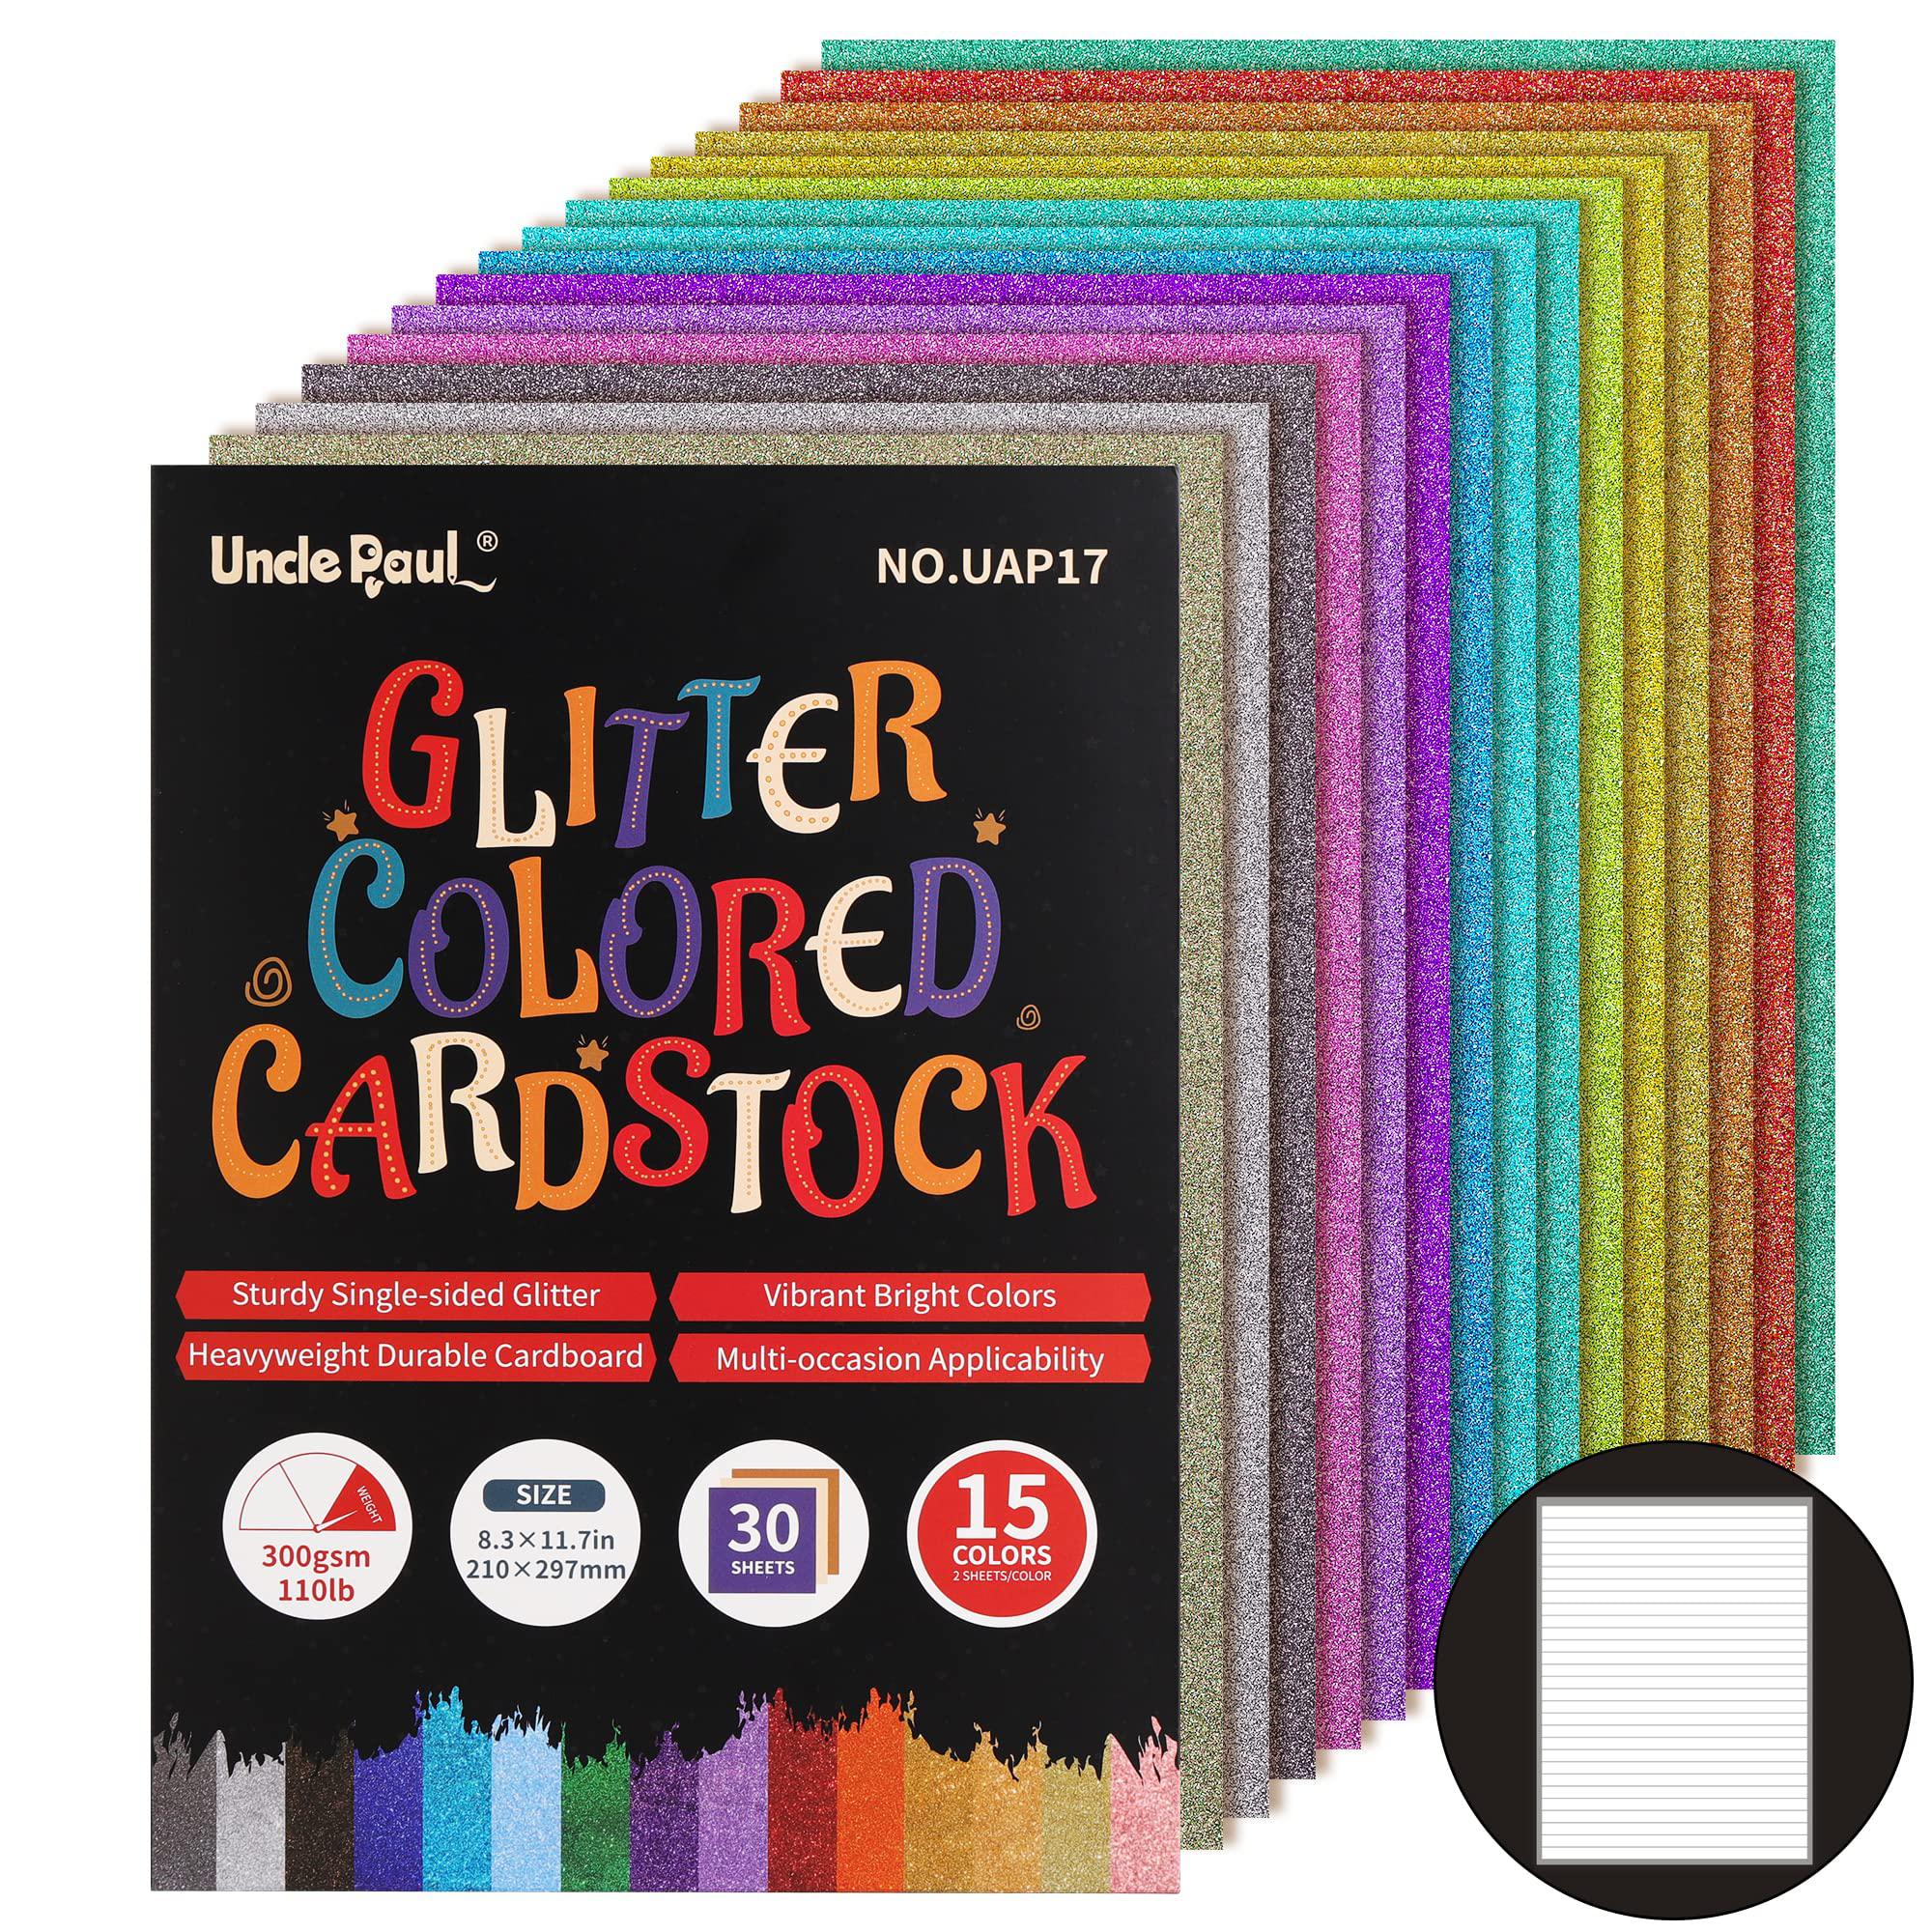 Uncle Paul glitter cardstock paper, 30 sheets 15 colors 300gsm/110ib colored cardstock premium glitter paper for crafts, a4 glitter card